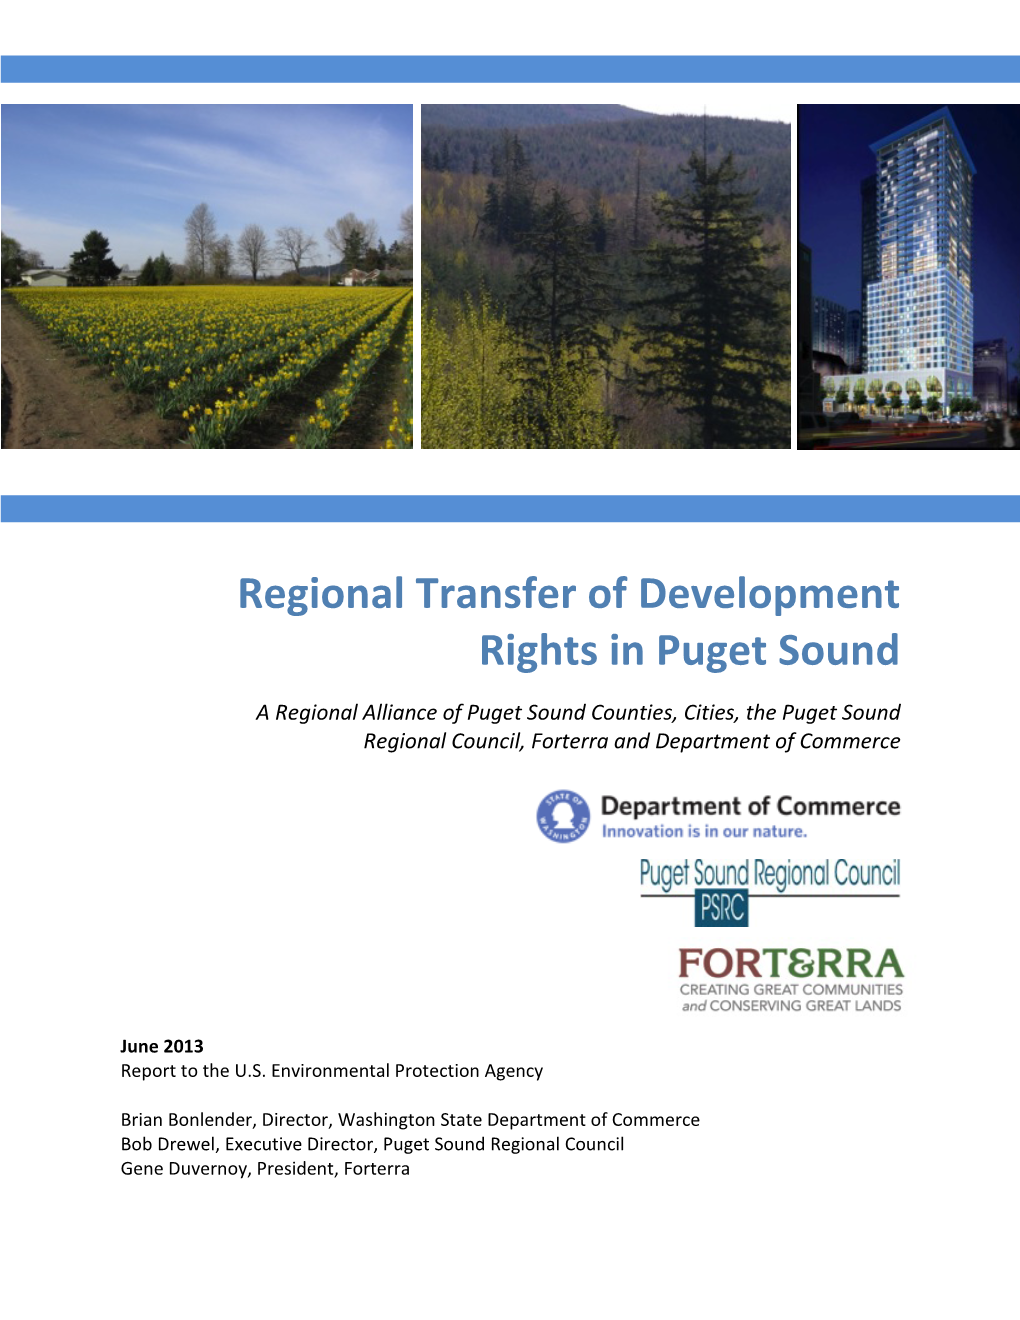 Regional Transfer of Development Rights in Puget Sound